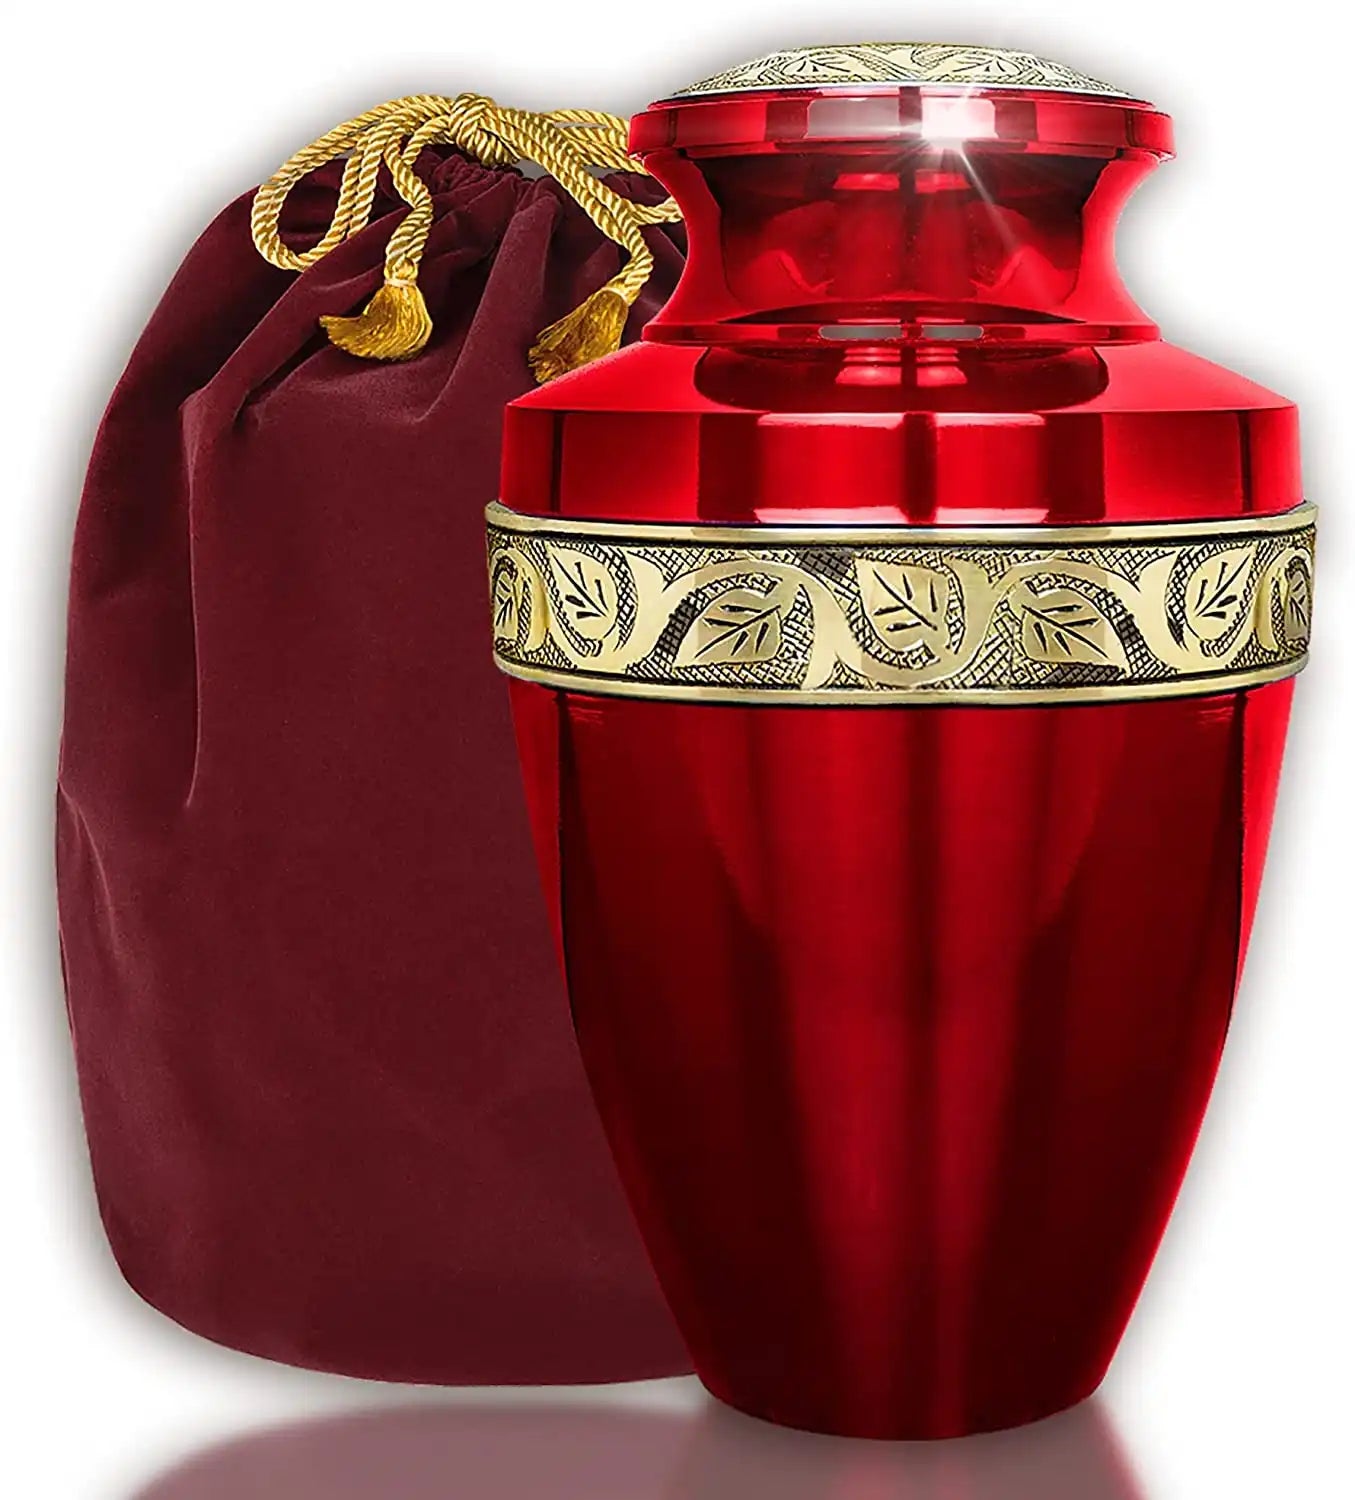 Red Urns for Ashes - Handcrafted Cremation Urn, Large Burial Urns for Ashes Adult Male - Urns for Human Ashes Adult Female, Funeral Decorative Urns - Up to 200lbs